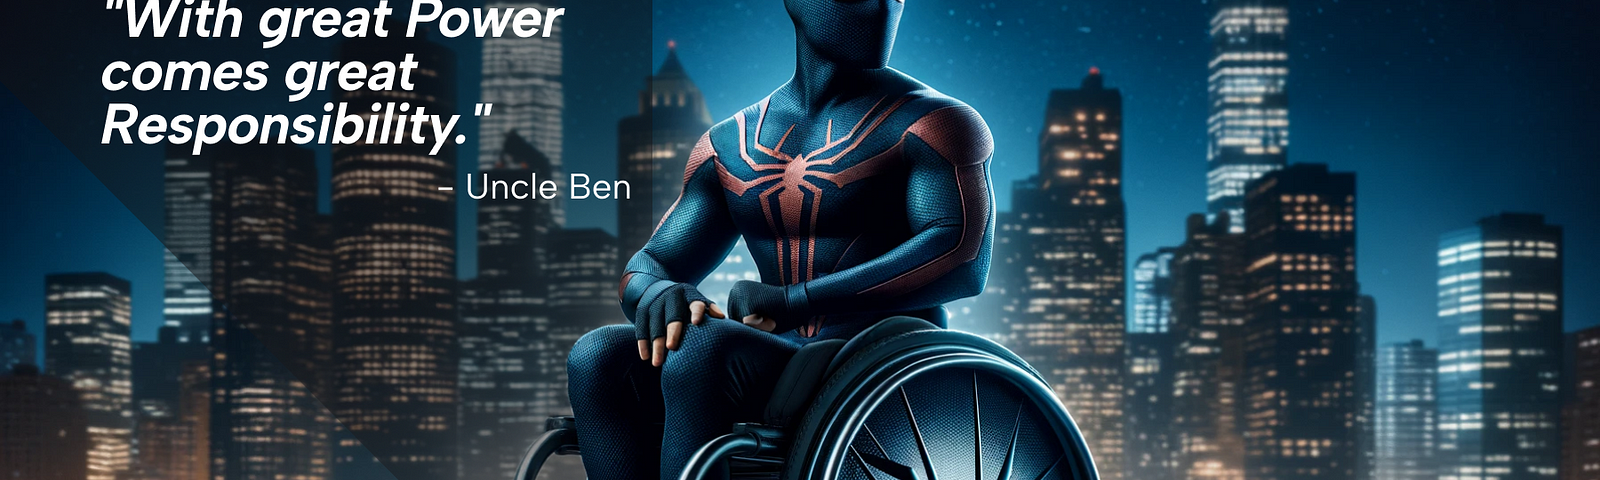 “With great Power comes great Responsability” — Uncle Ben